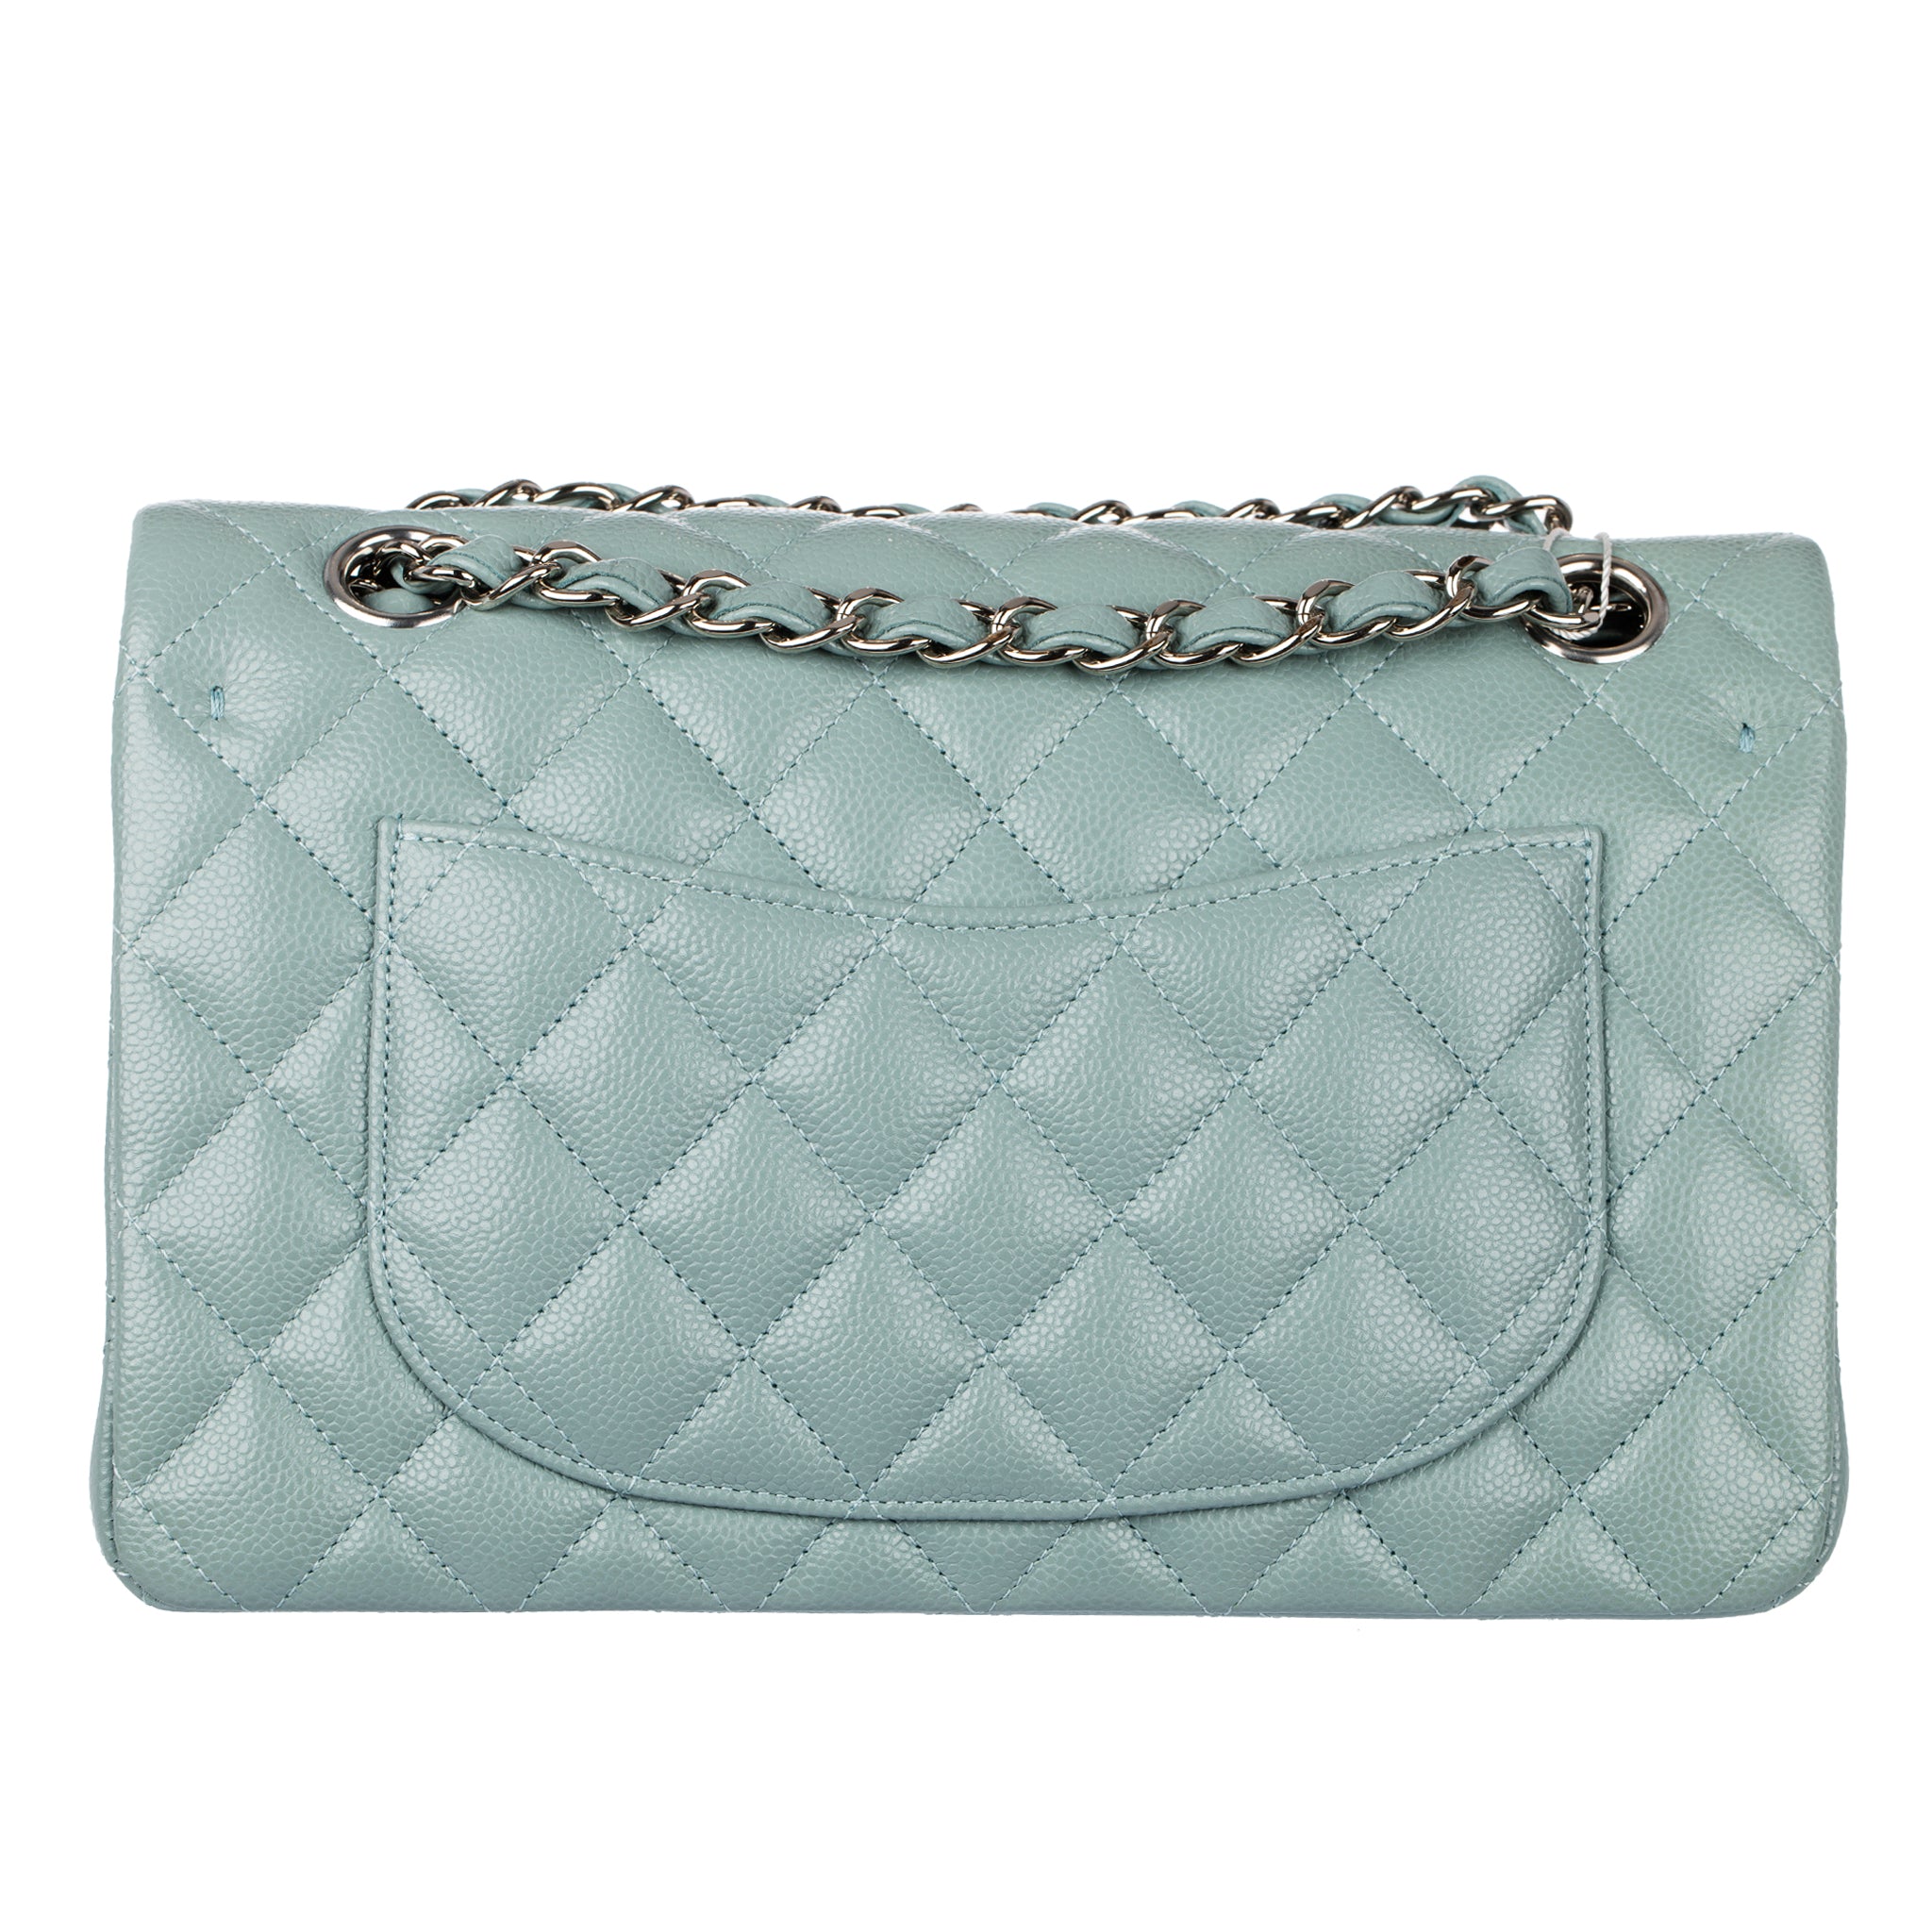 Chanel Small Double Classic Flap Bag Dusty Blue Caviar Leather Silver Tone Hardware